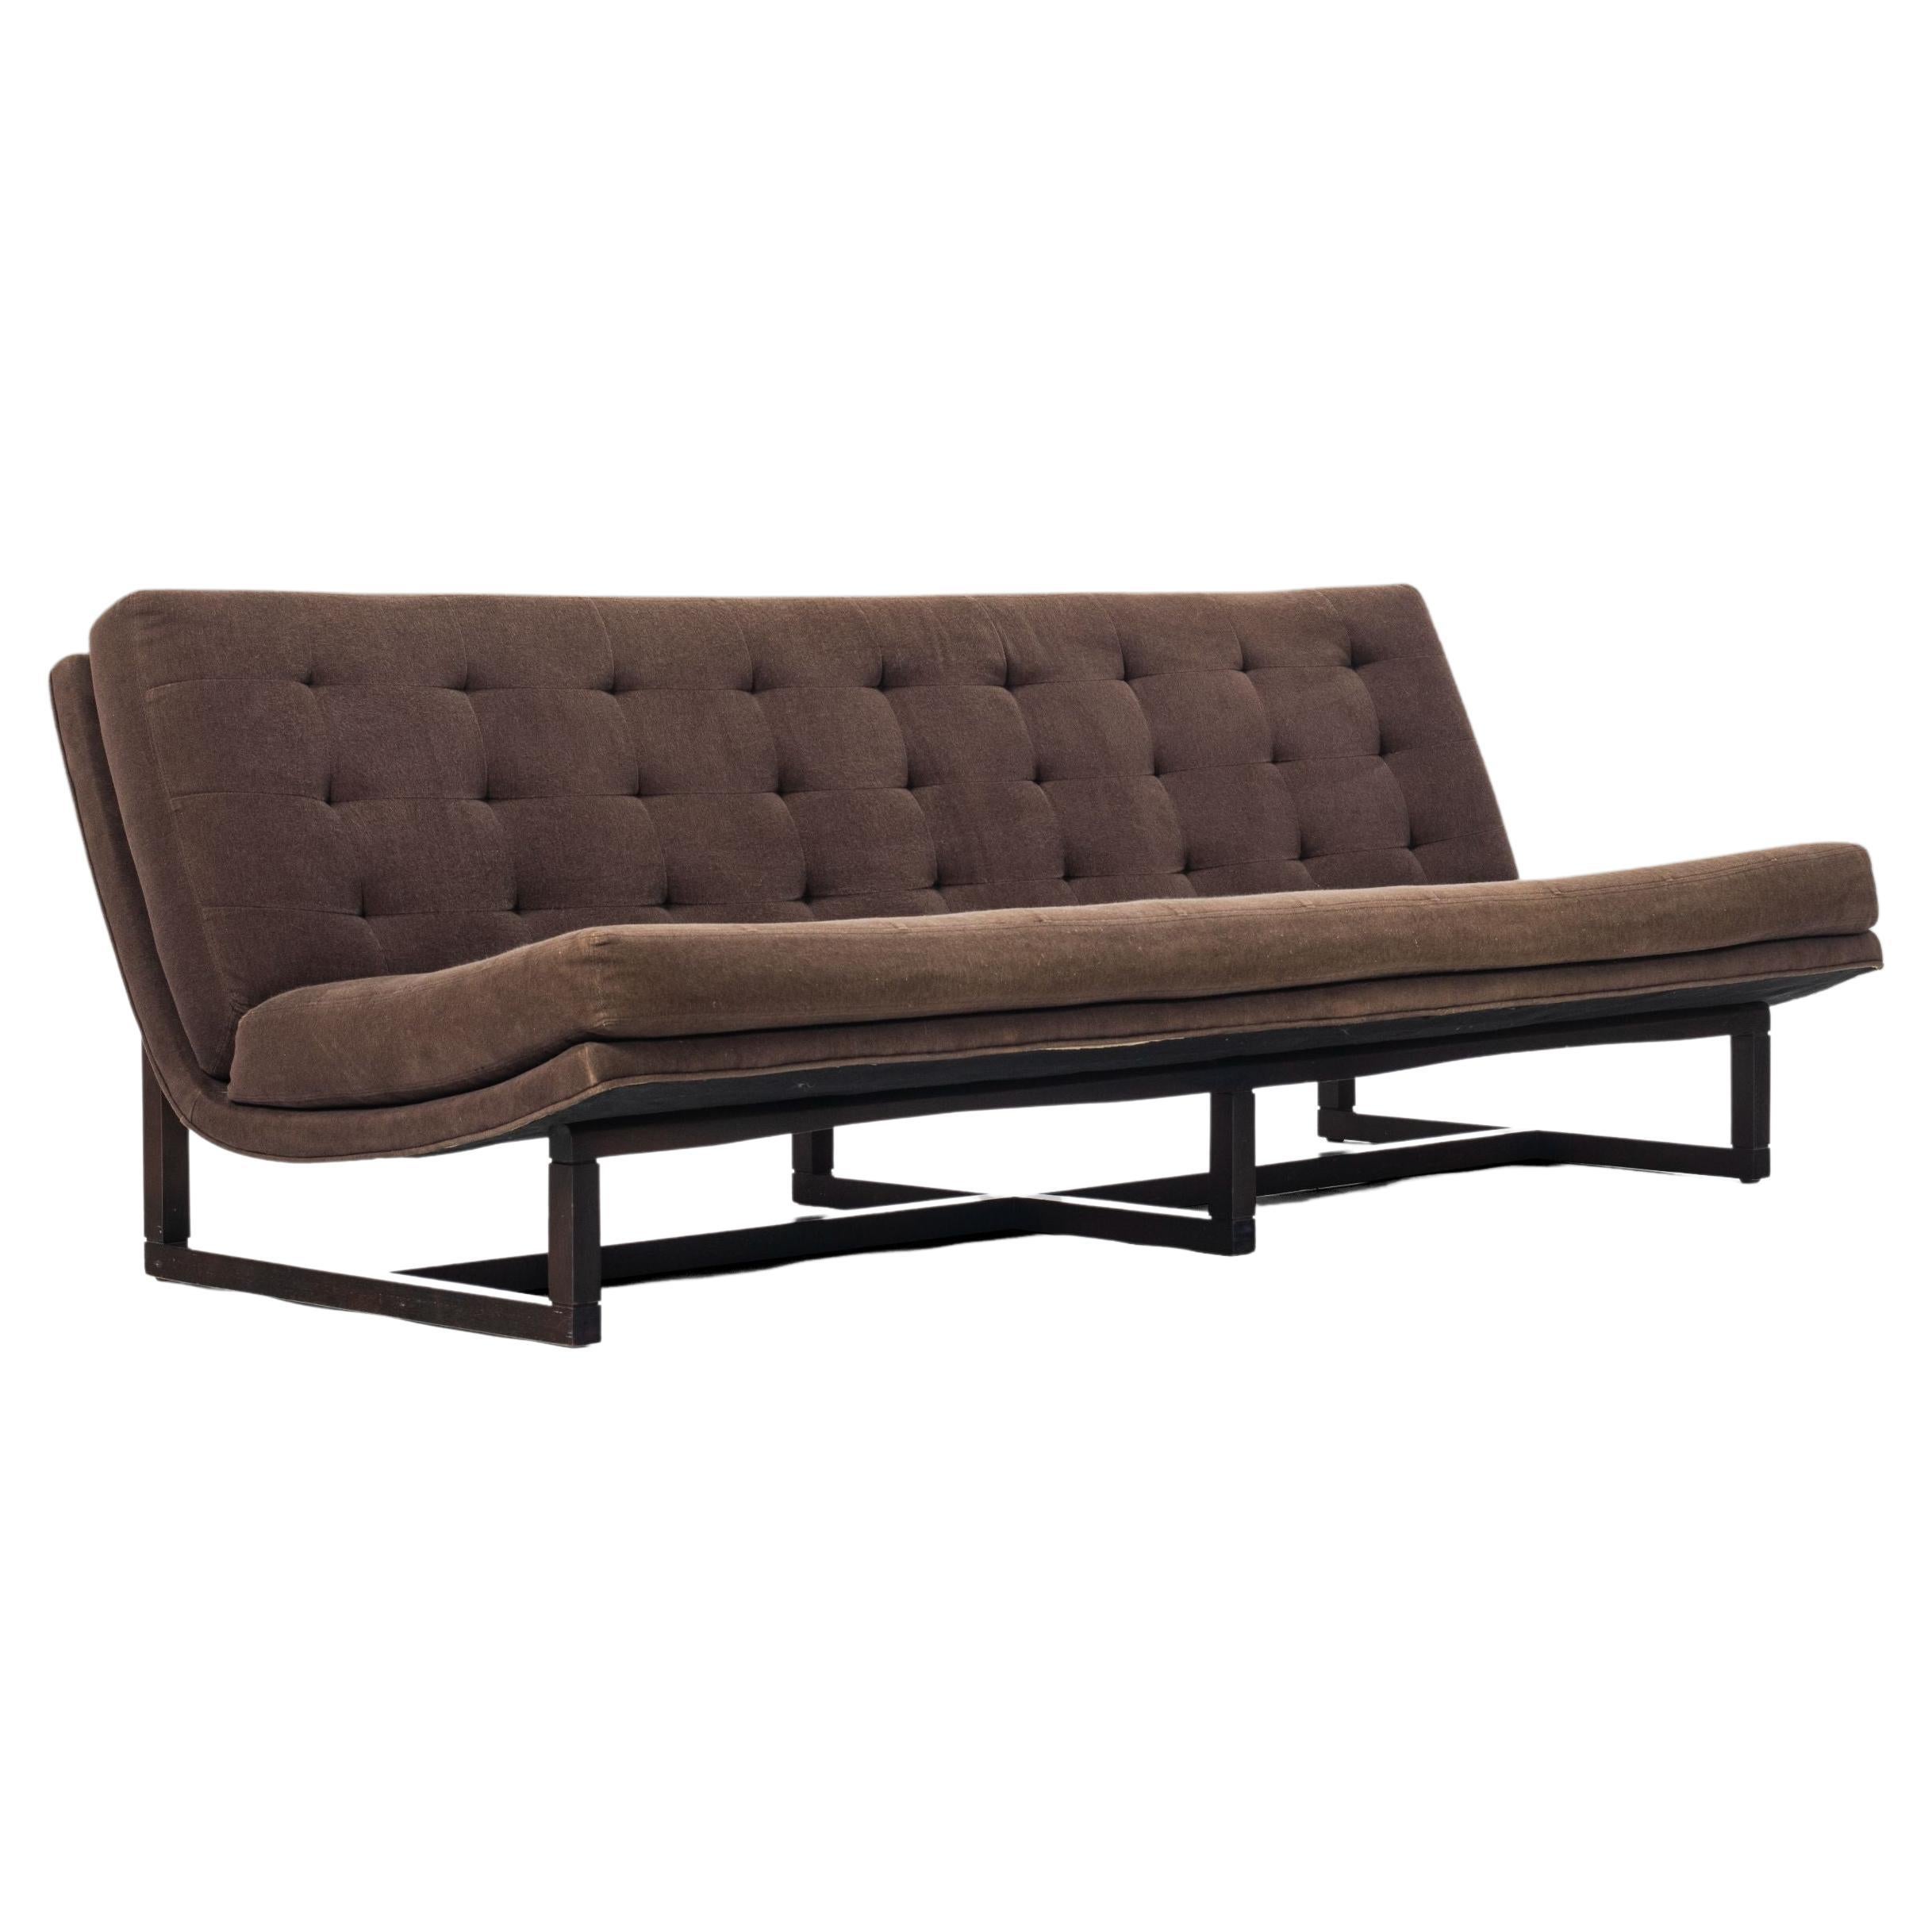 Milo Baughman Style Three Seat Scoop Sofa/Couch on Walnut Frame, USA, c. 1970's For Sale